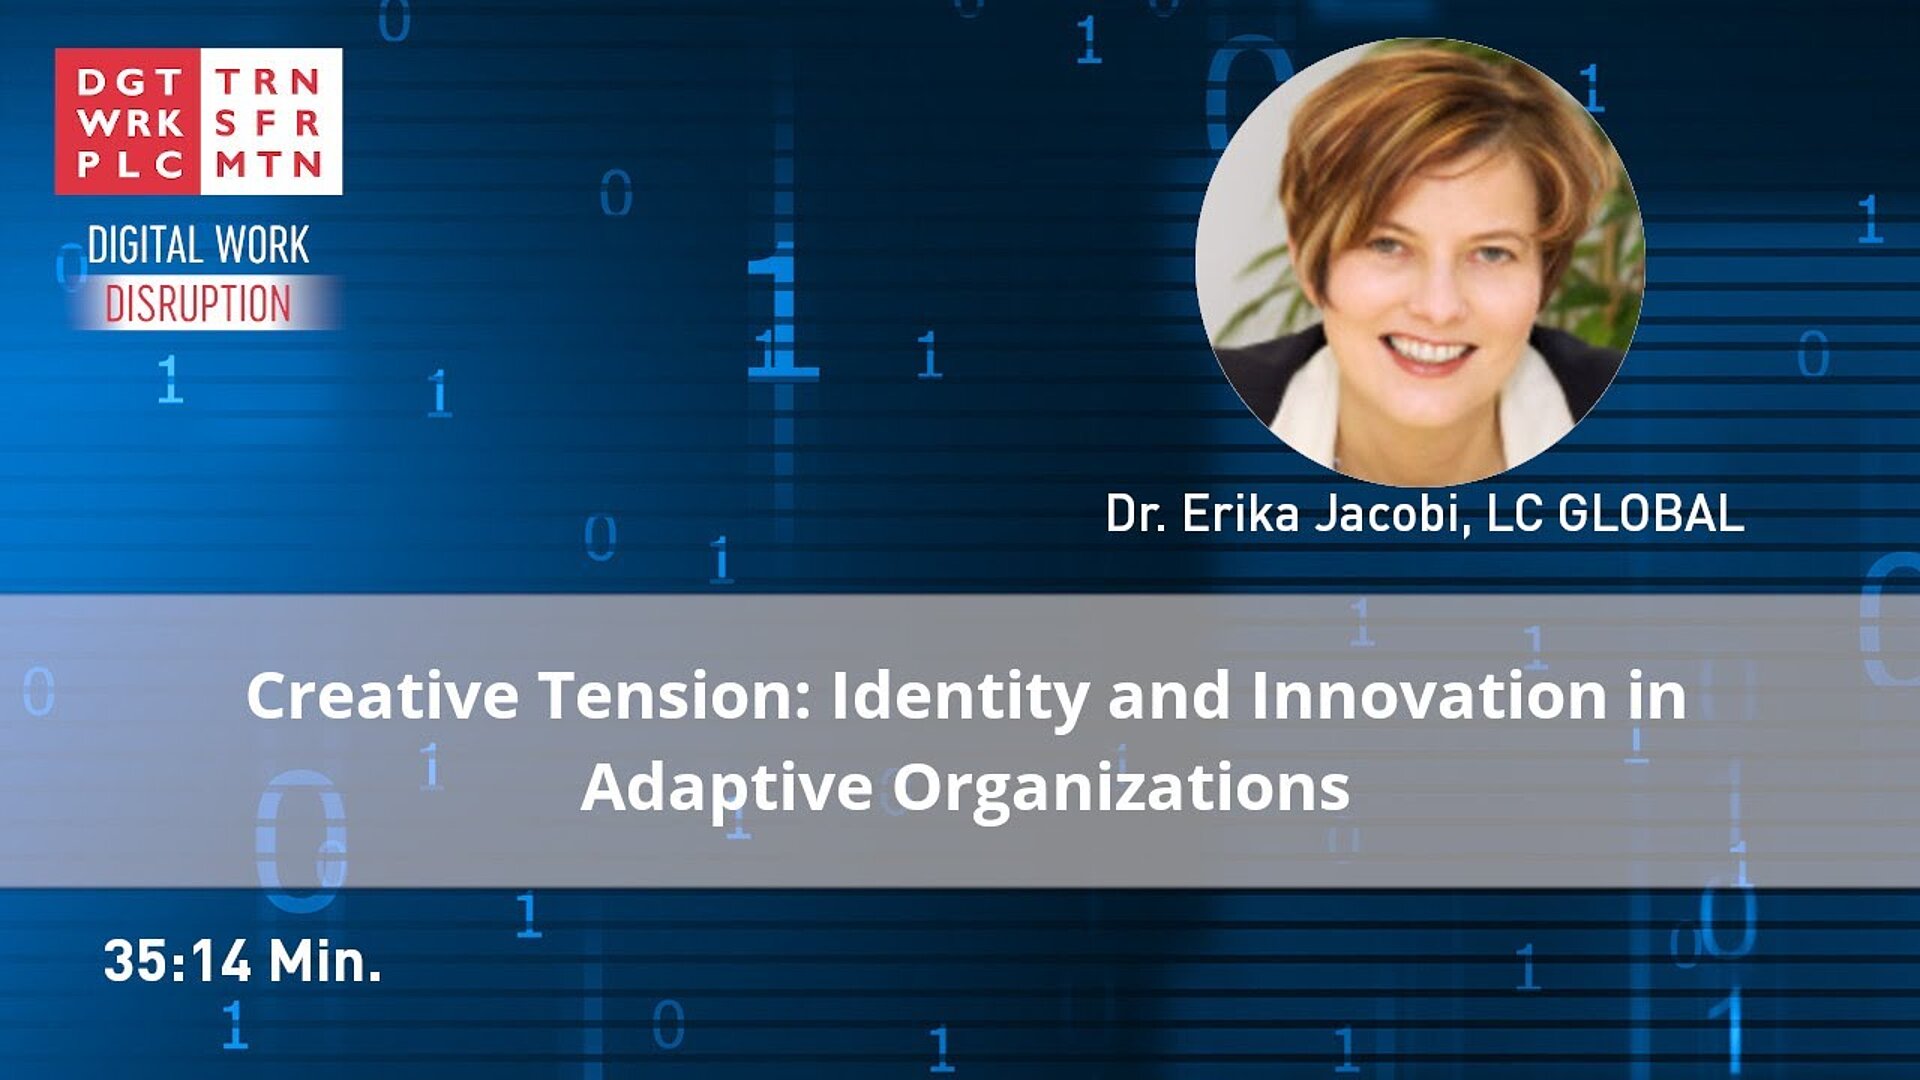 Creative Tension: Identity and Innovation in Adaptive Organizations